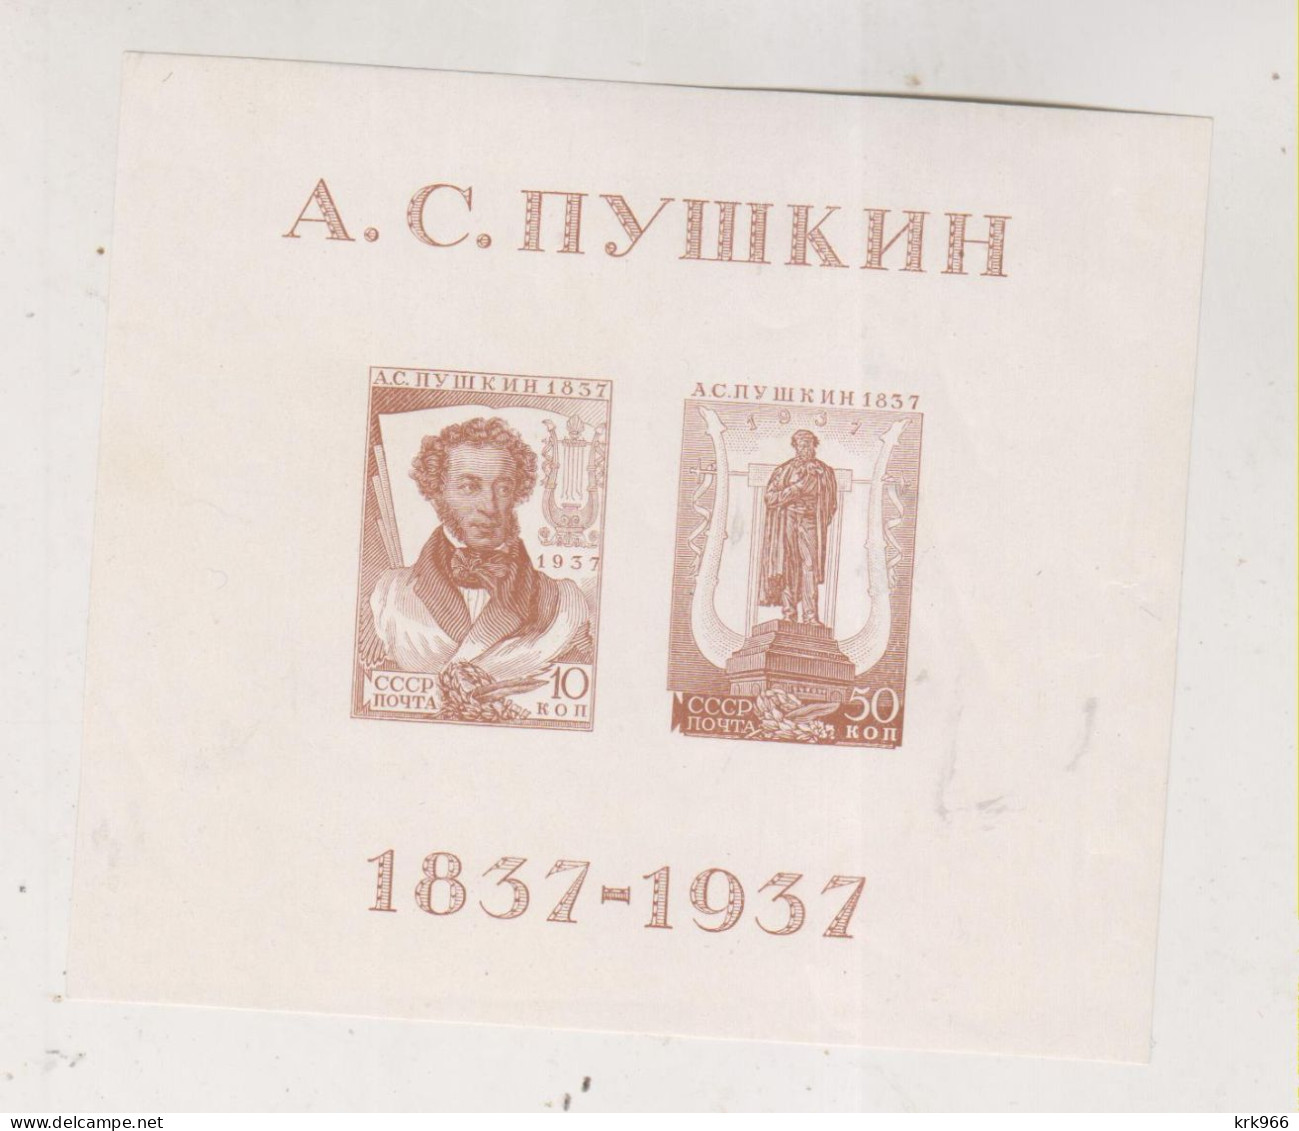 RUSSIA 1937 Nice Sheet   MNH - Unused Stamps